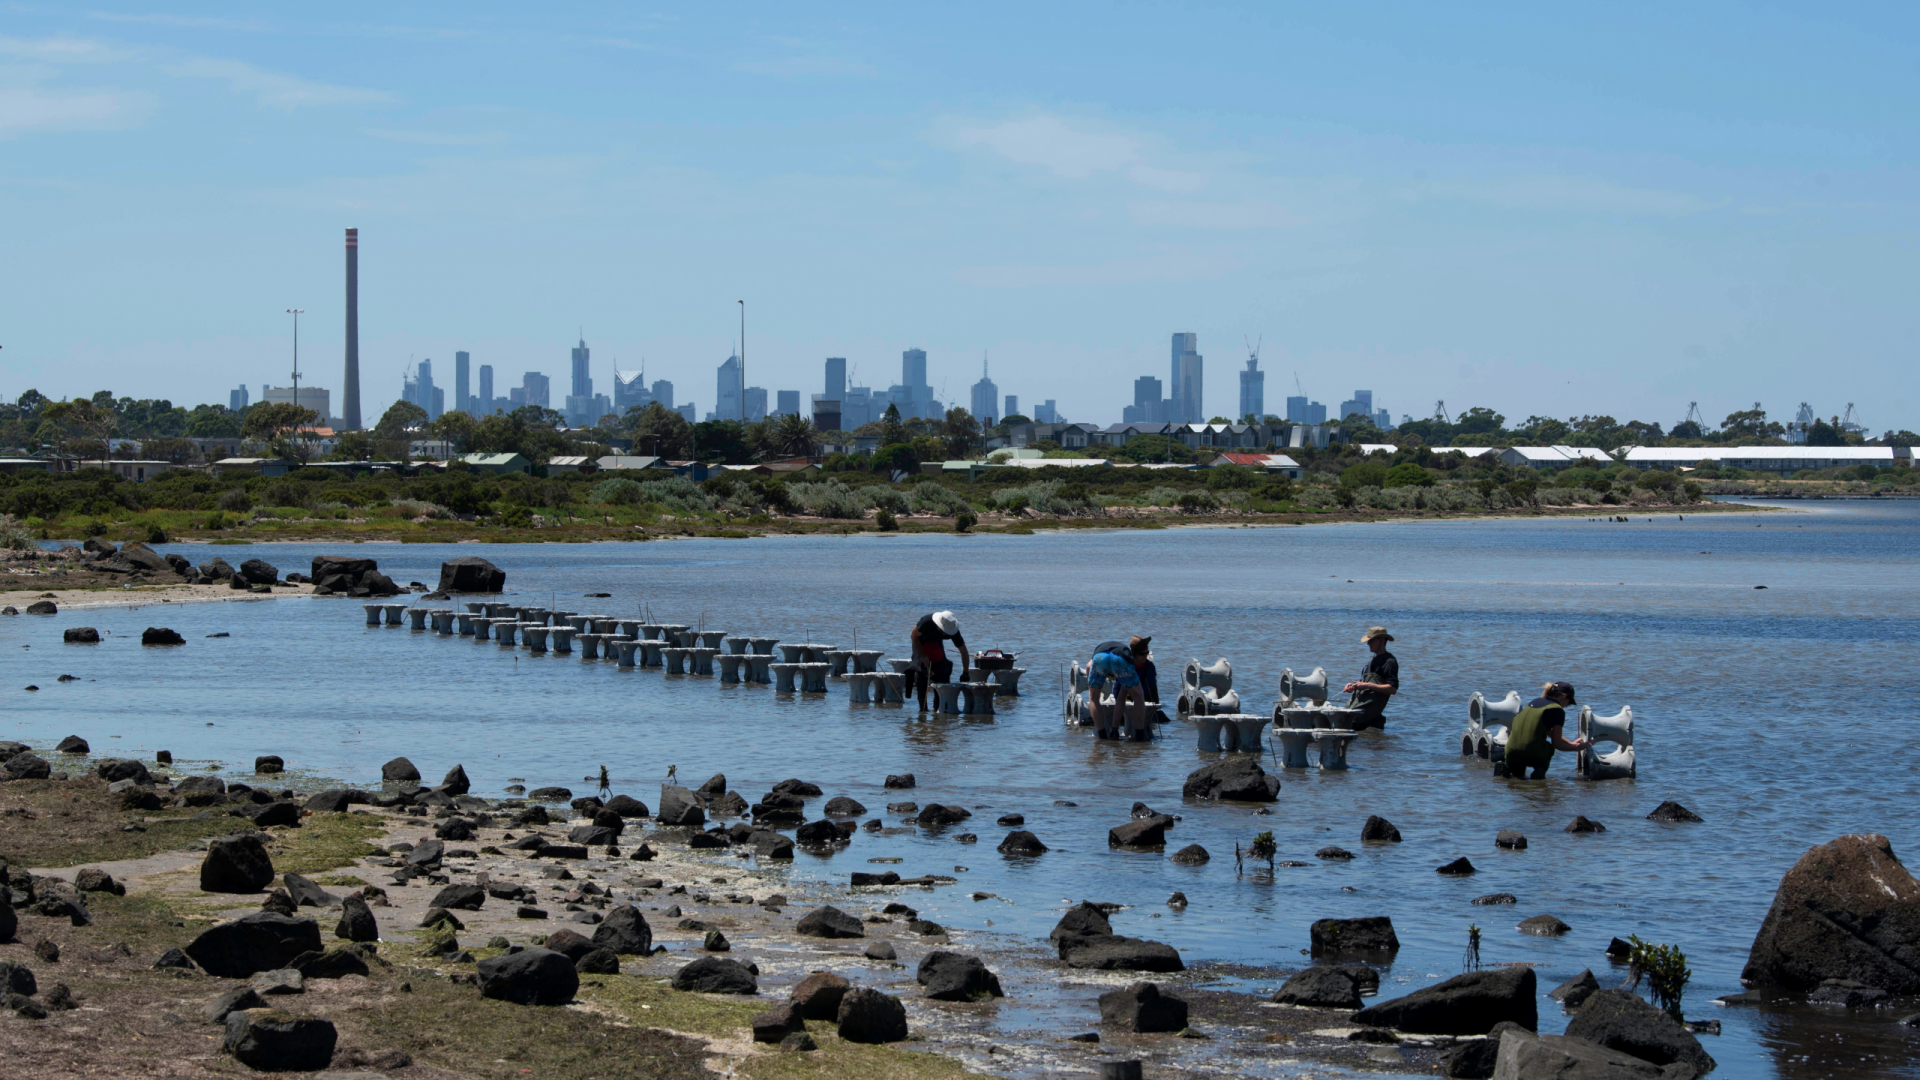 Photo of rocky coast line with mangrove planters being installed by five people in shallow water and city skyline in distance